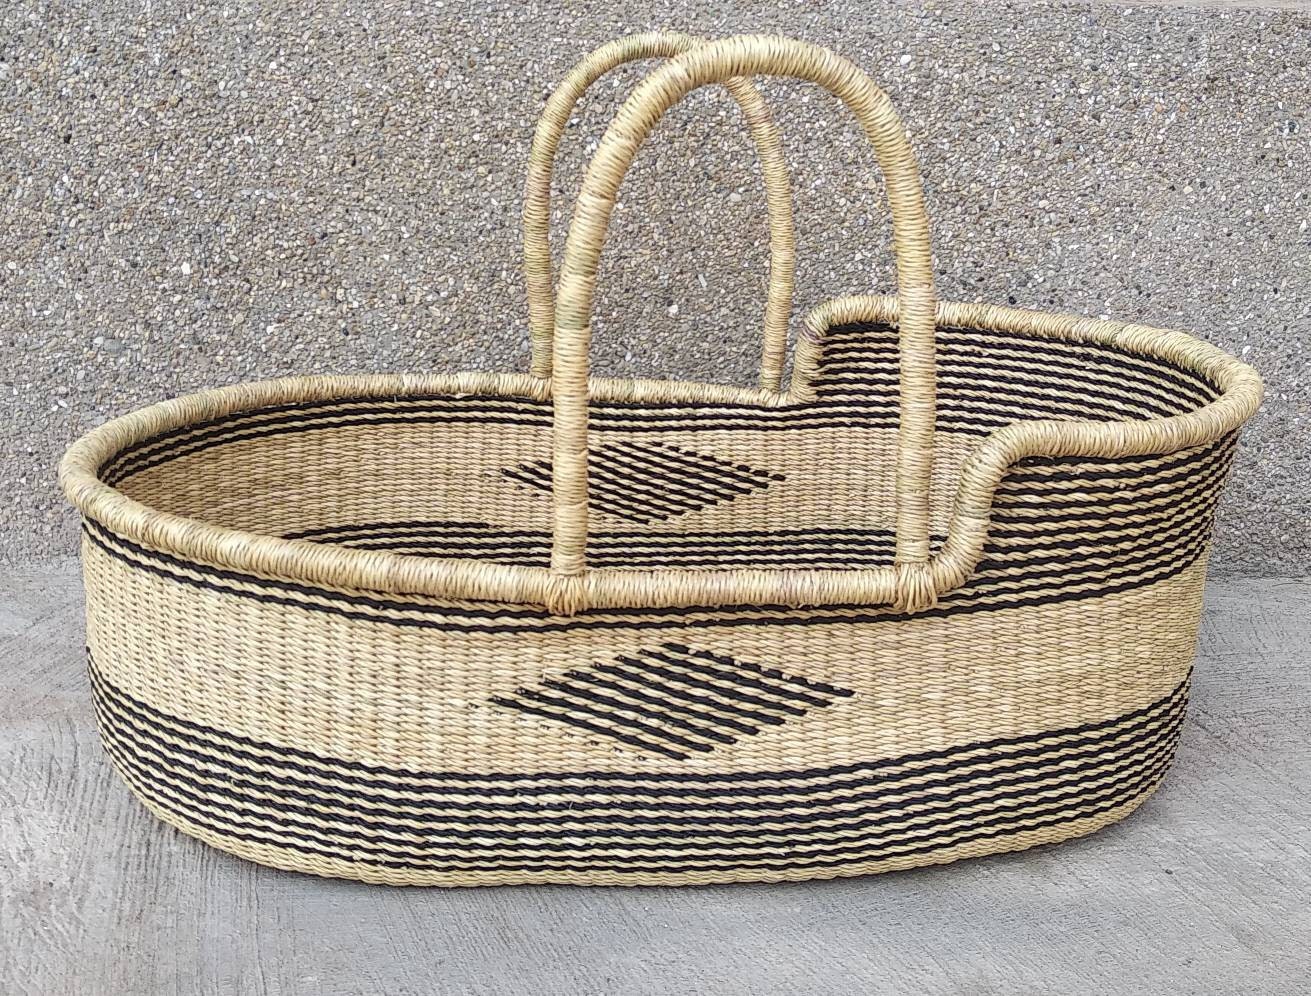 Moses Basket for Baby | Princess bed | Storage bed | Baby bassinet - AfricanheritageGH